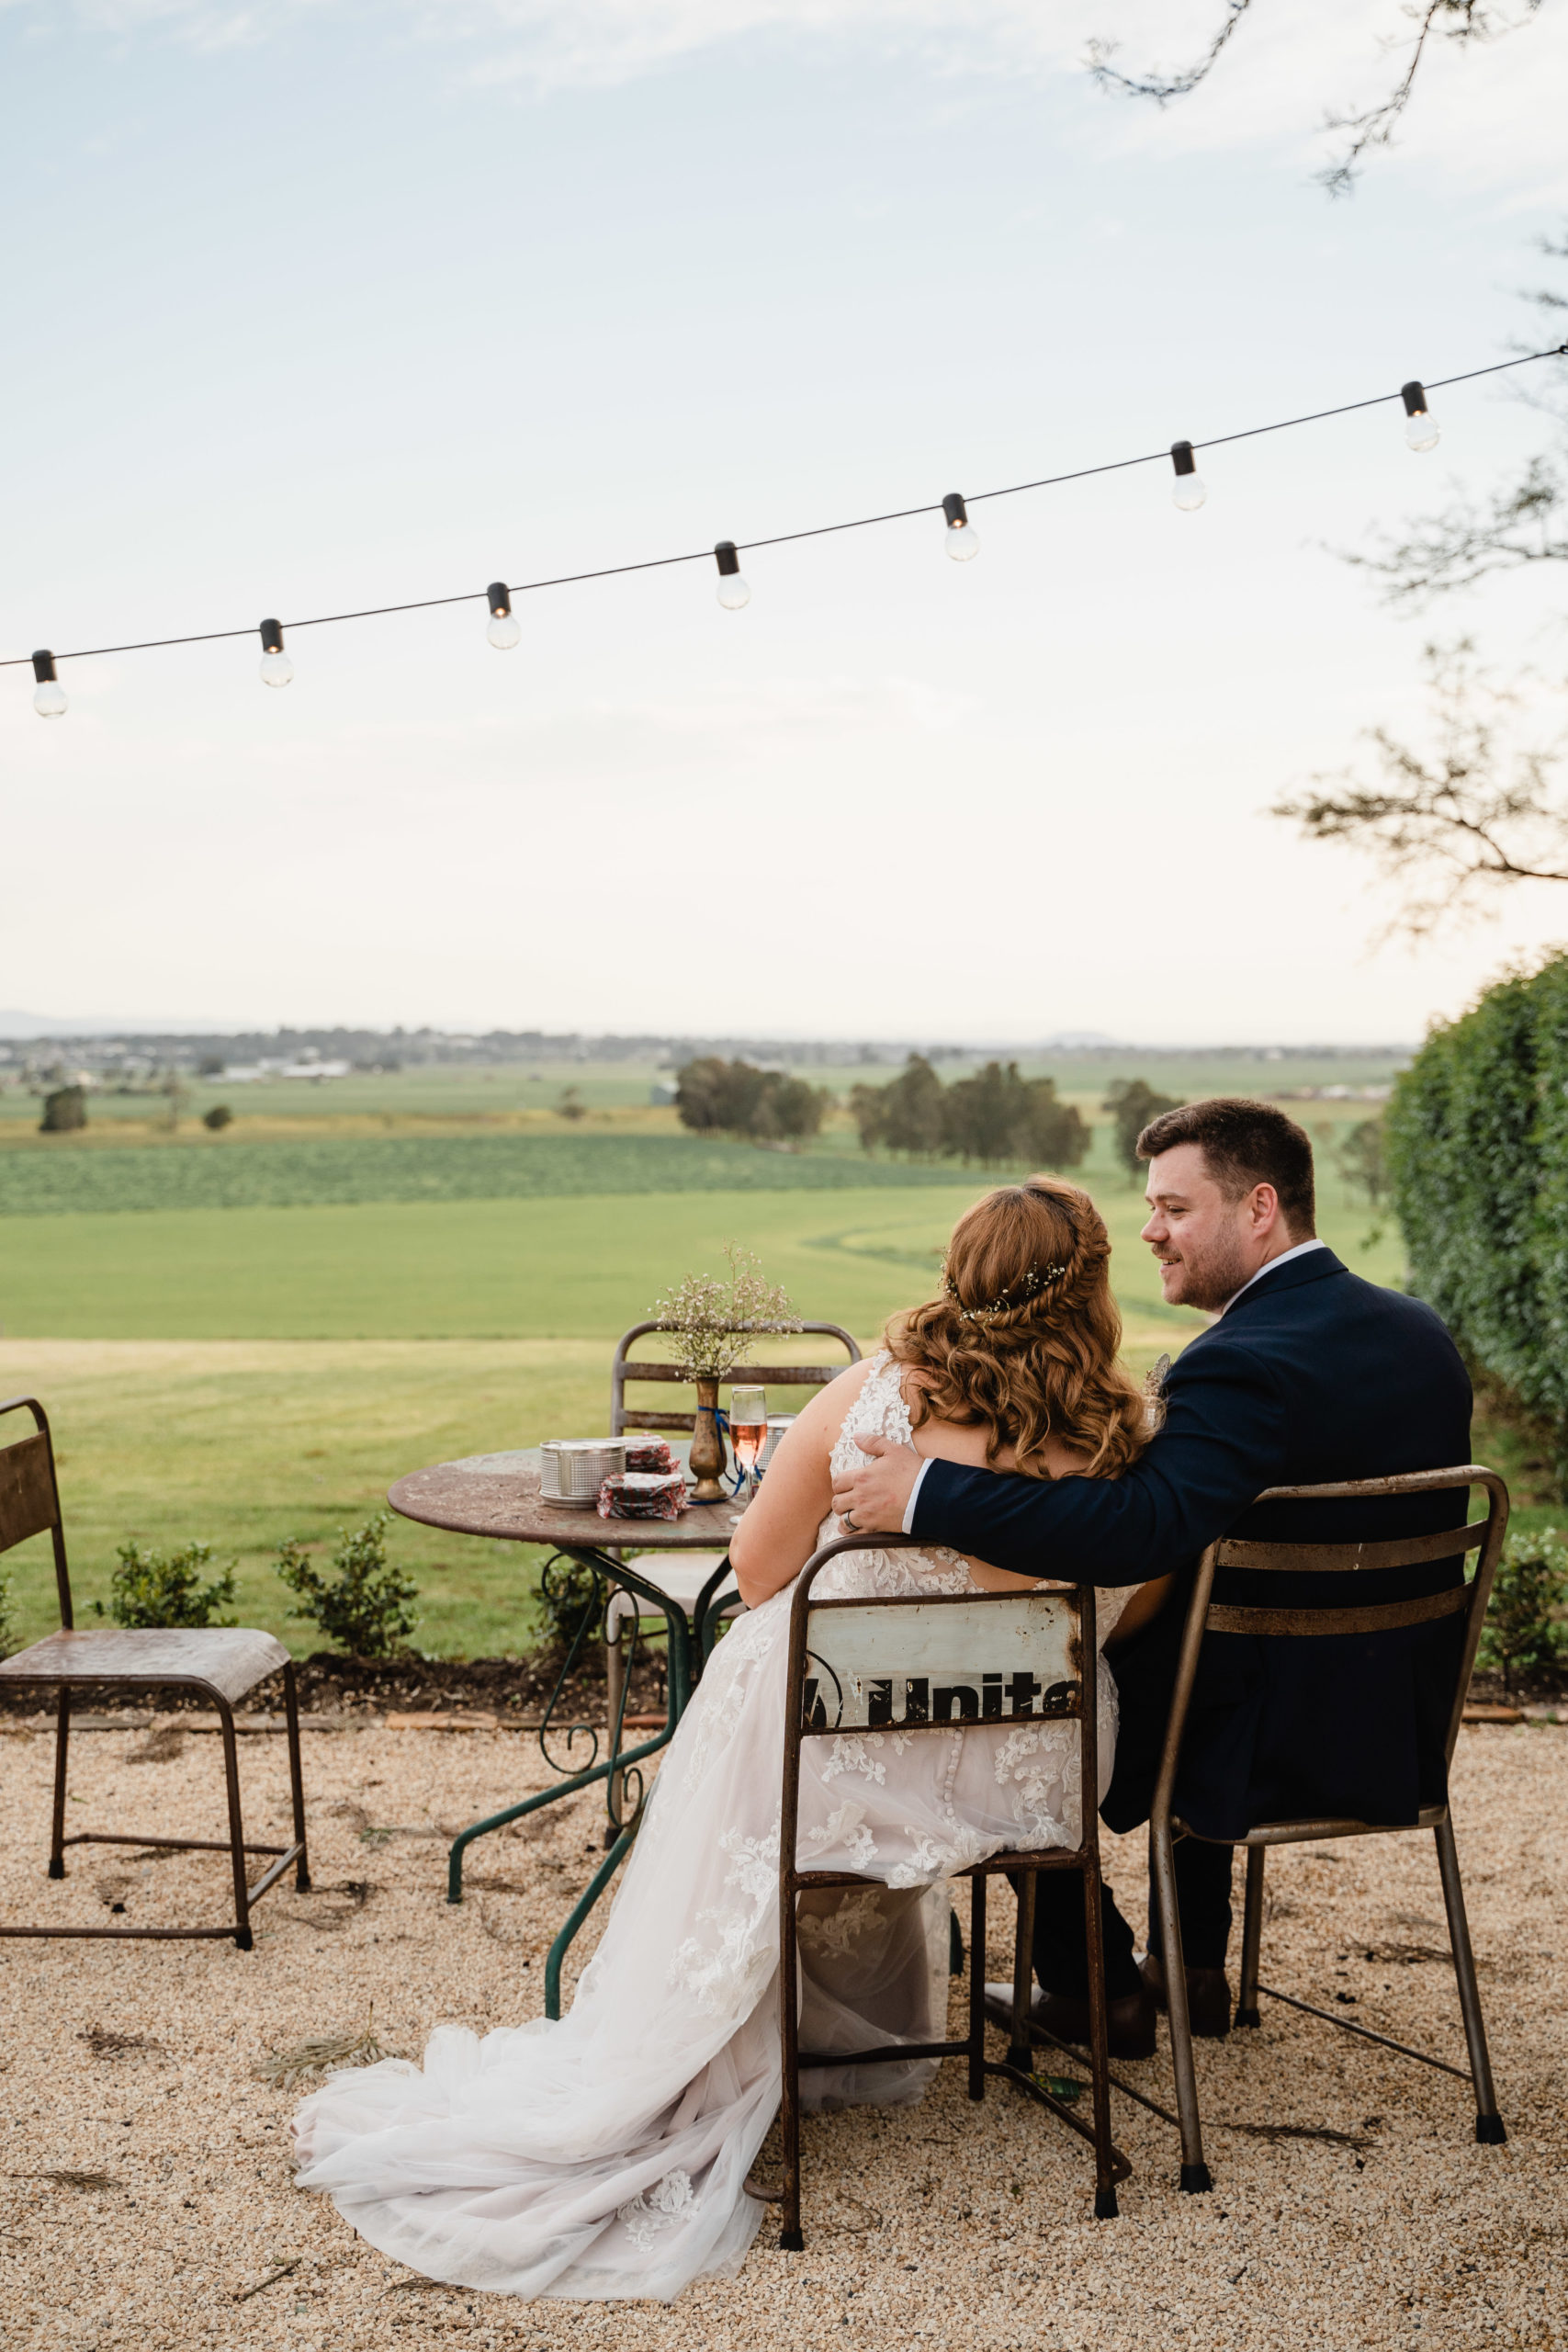 Bride and groom sitting and gazing out at the field at Wallalong House